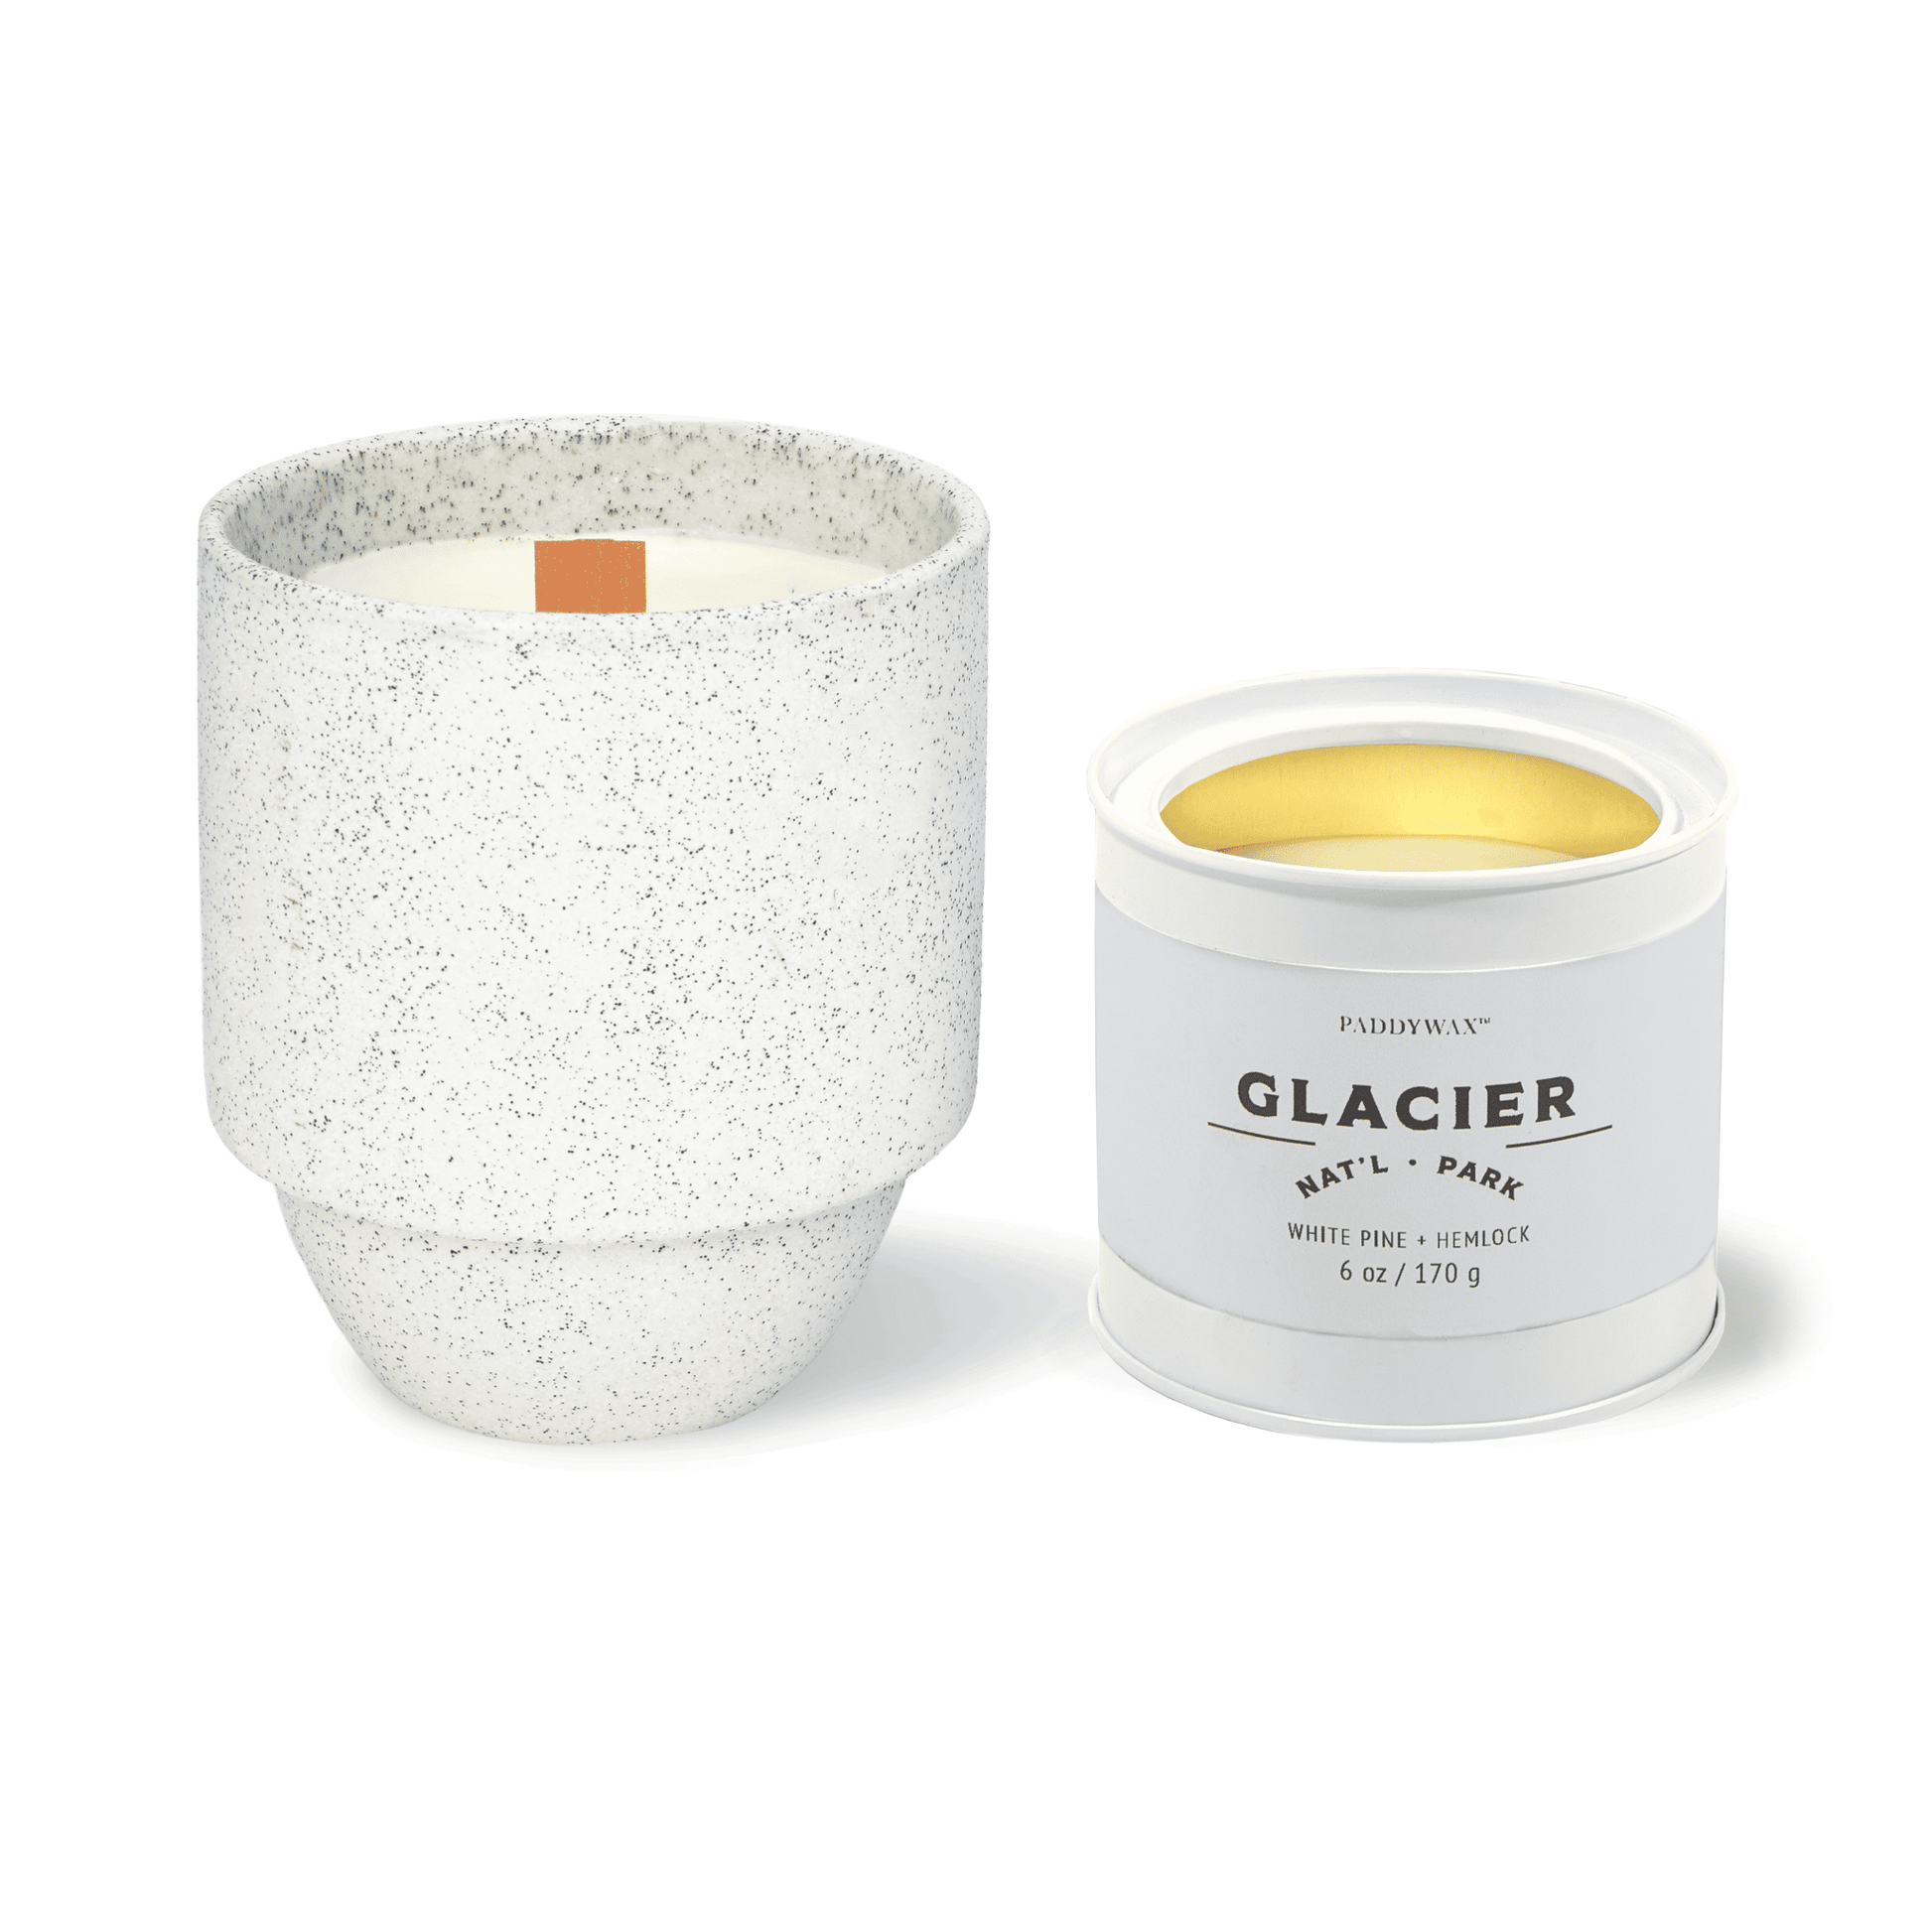 Parks 6oz Candle - White Pine + Hemlock candle on a white background next to another Parks Collection candle.